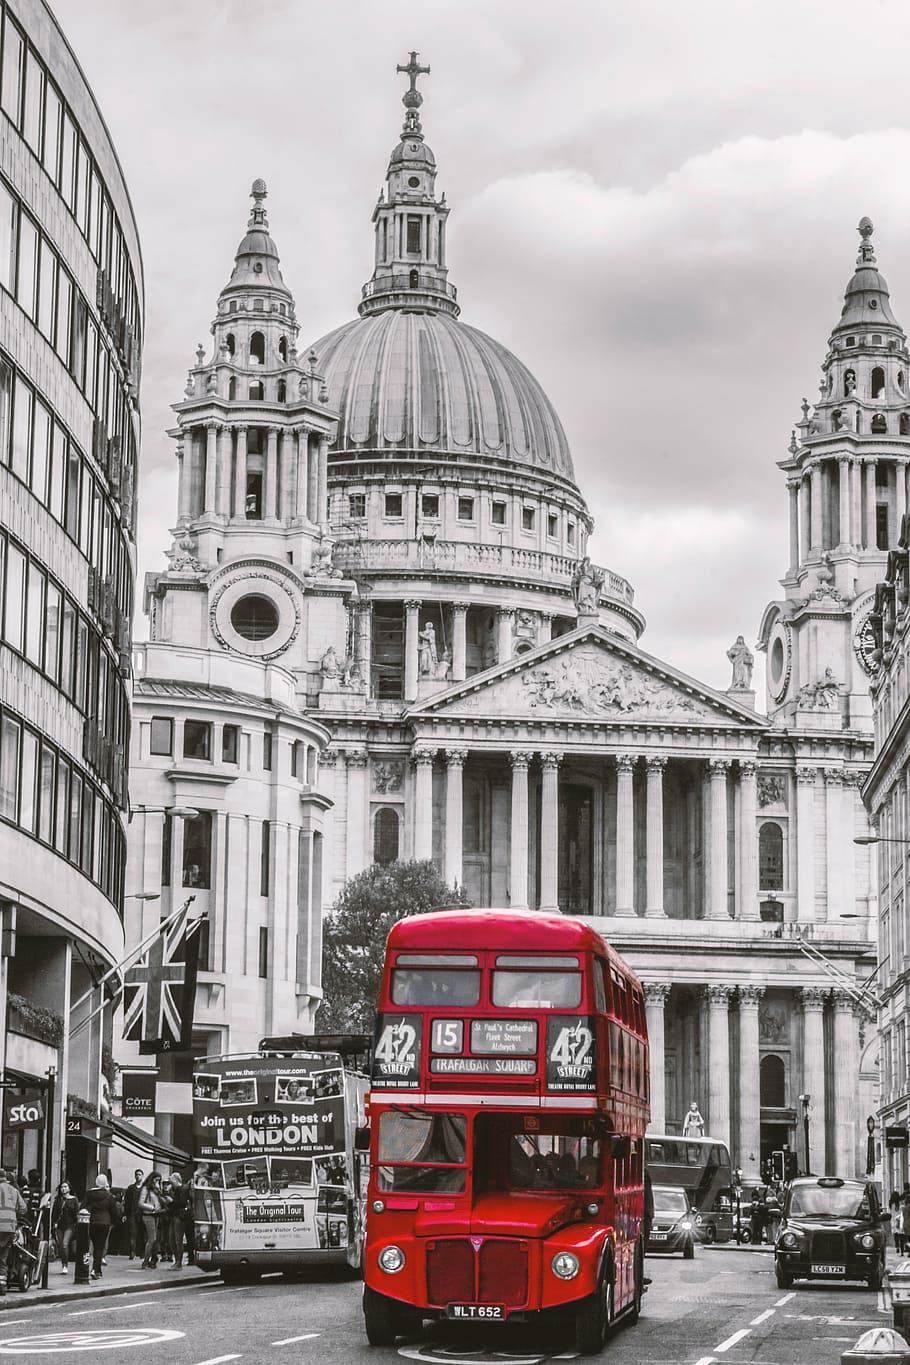 selective-color, red, double, decker bus, london, bus, st paul's, st paul's cathedral, double decker bus, traffic